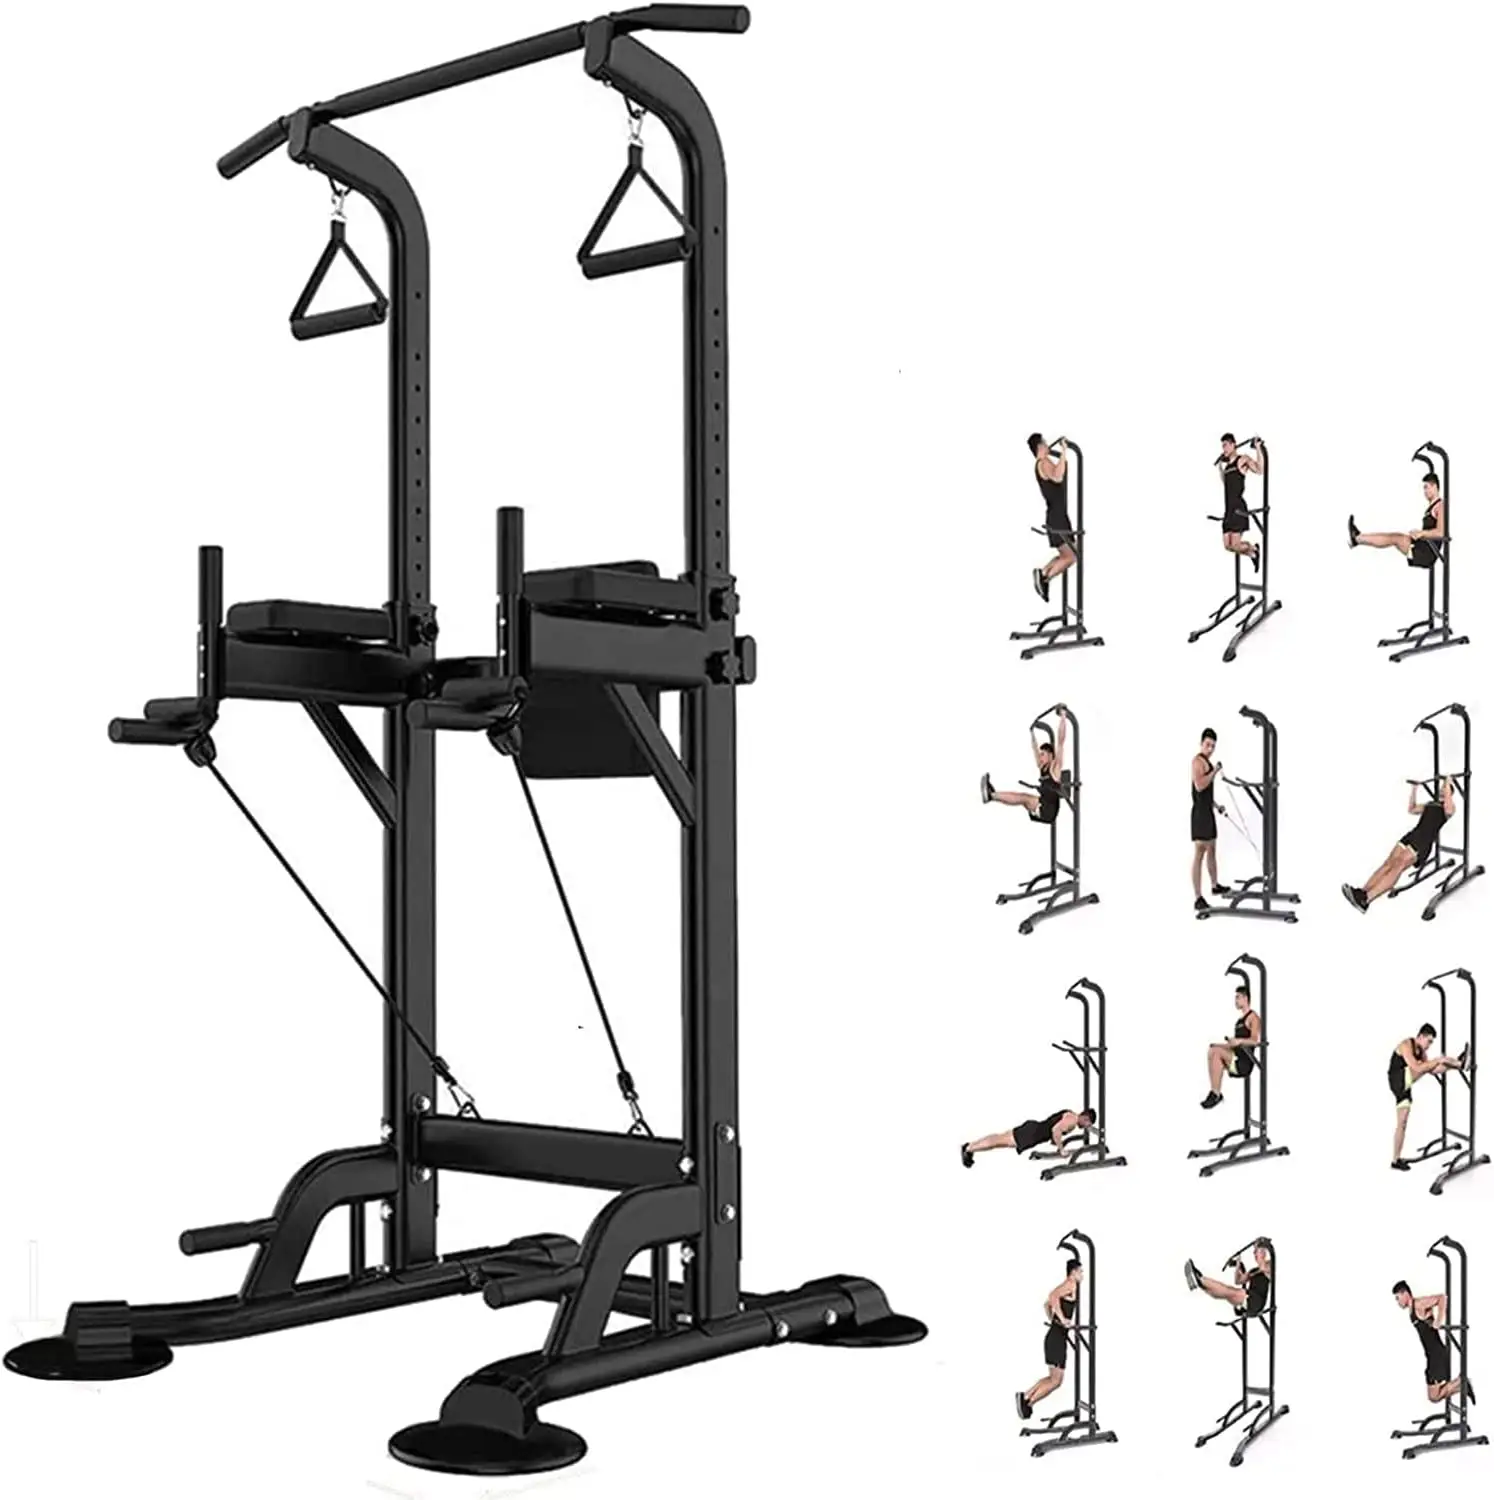 WellShow Sport Power Tower Pull Up Bar Dip Station for Home Gym Strength Training Workout Equipment